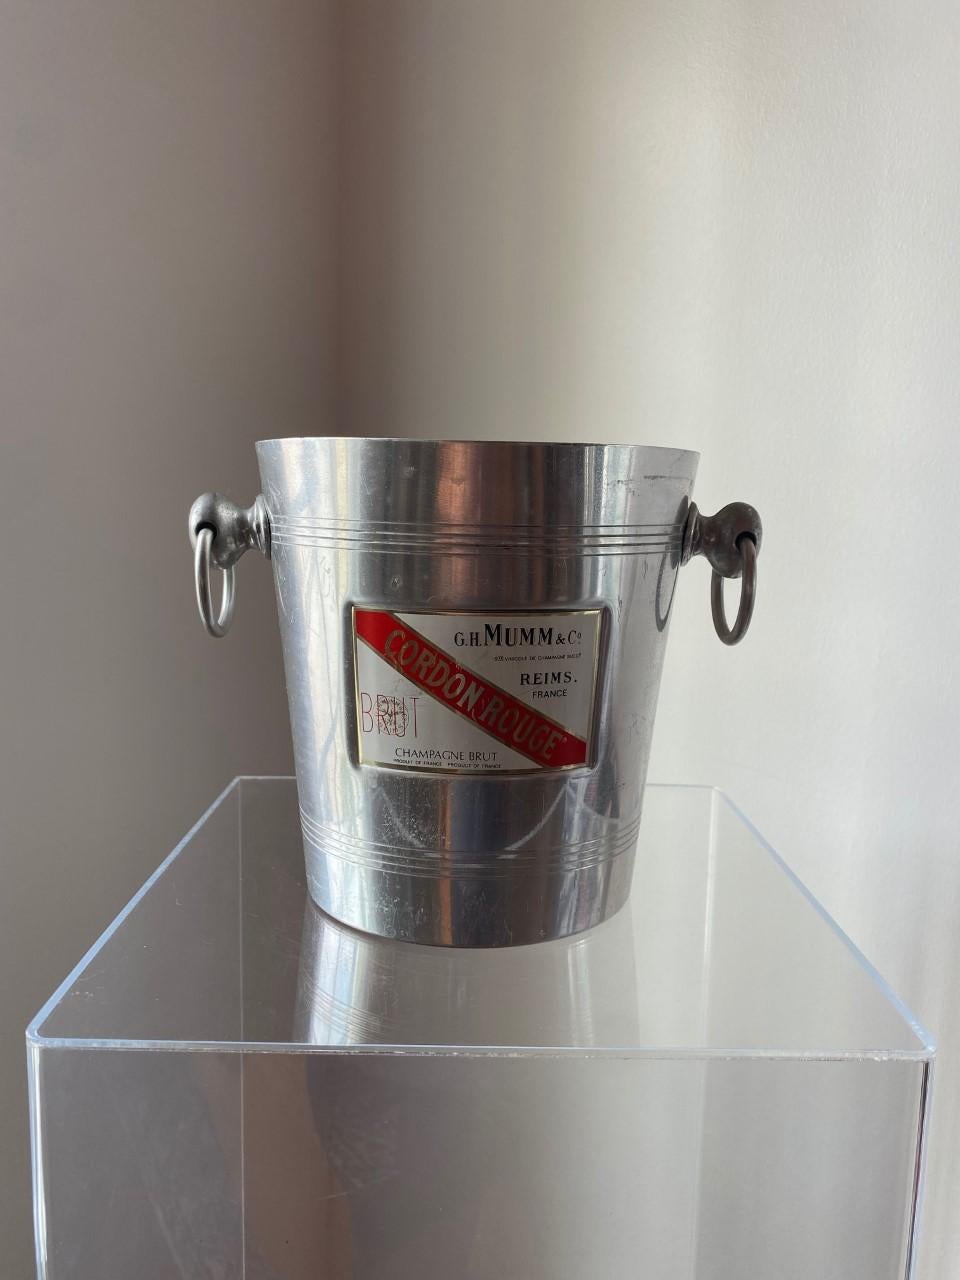 These aluminum champagne buckets were used in the 1950s and 1960s, and typically were marked with the vintner's name. They're great for chilling wine, for flowers, or for just about anything. This piece is especially nice with a bottle of wine from